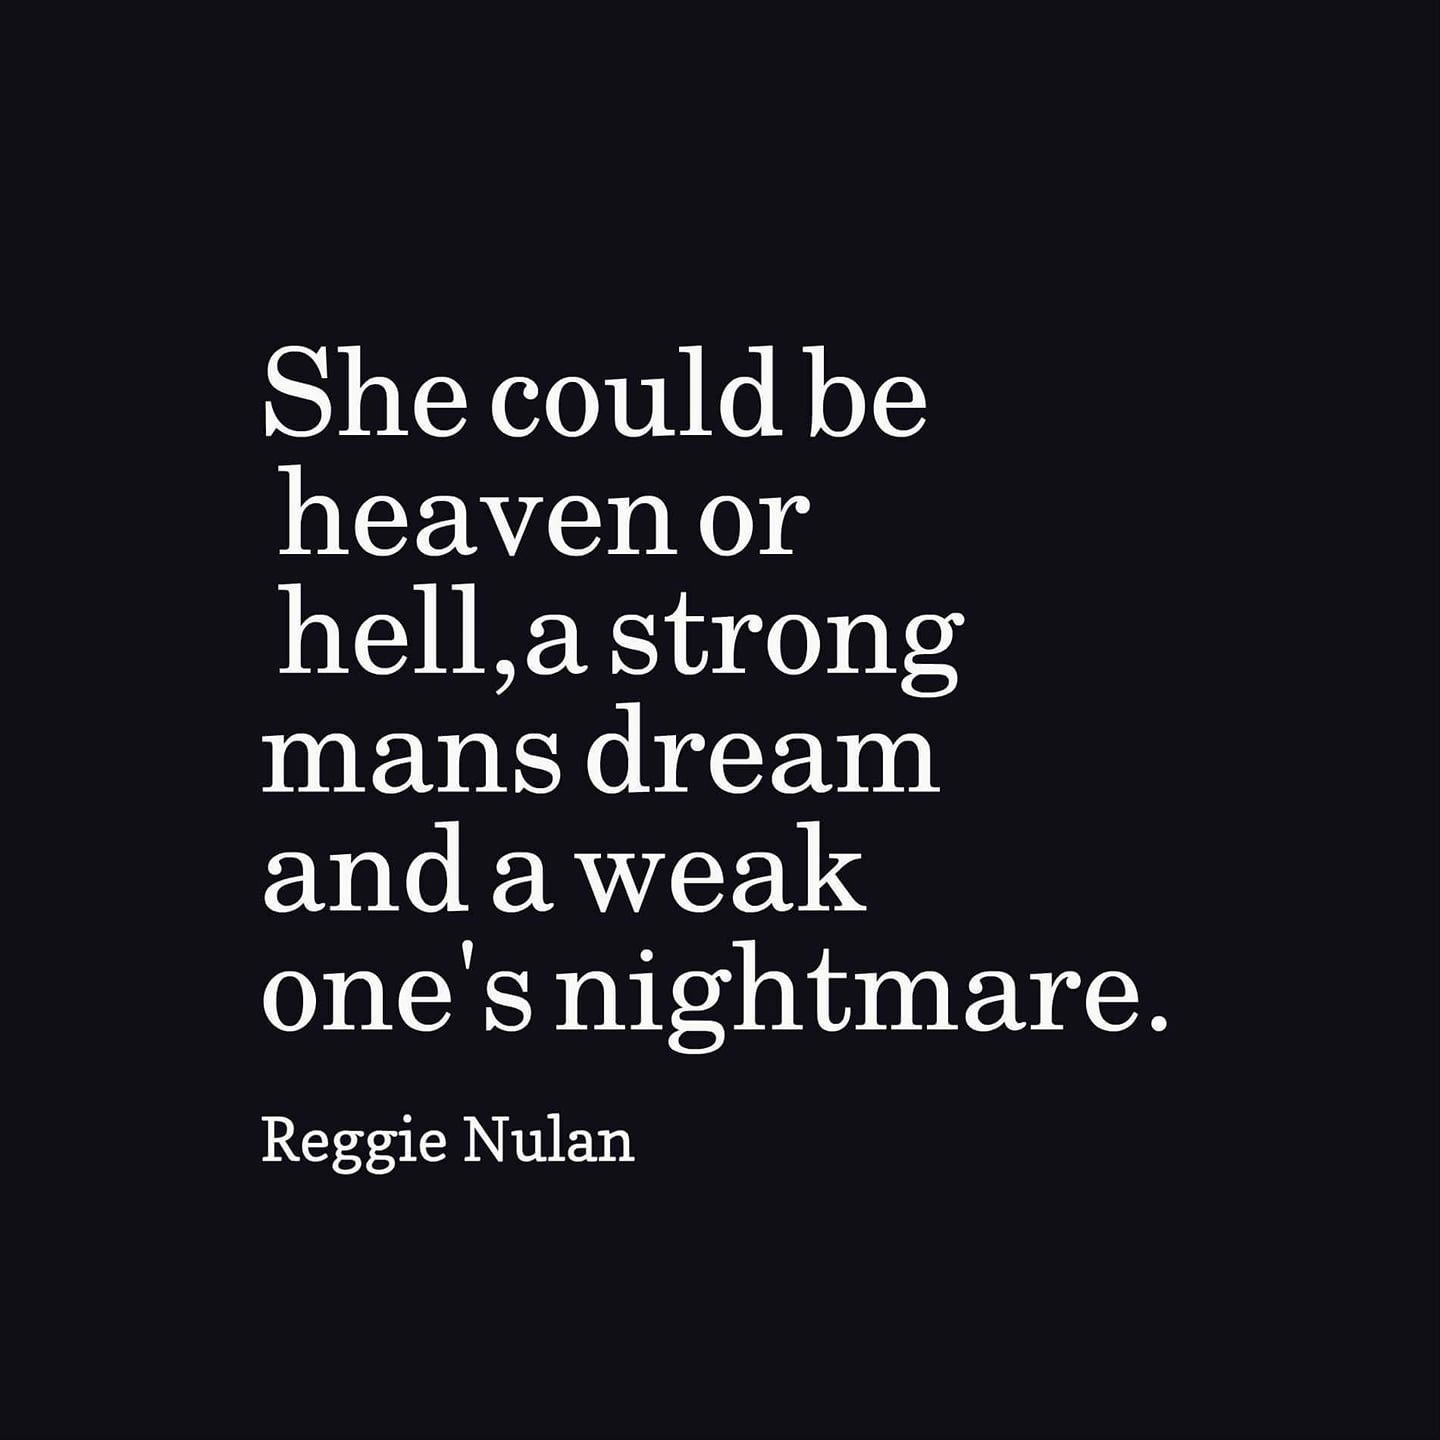 she could be heaven or hell a strong mans dream and a weak one’s nightmare. reggie nulan